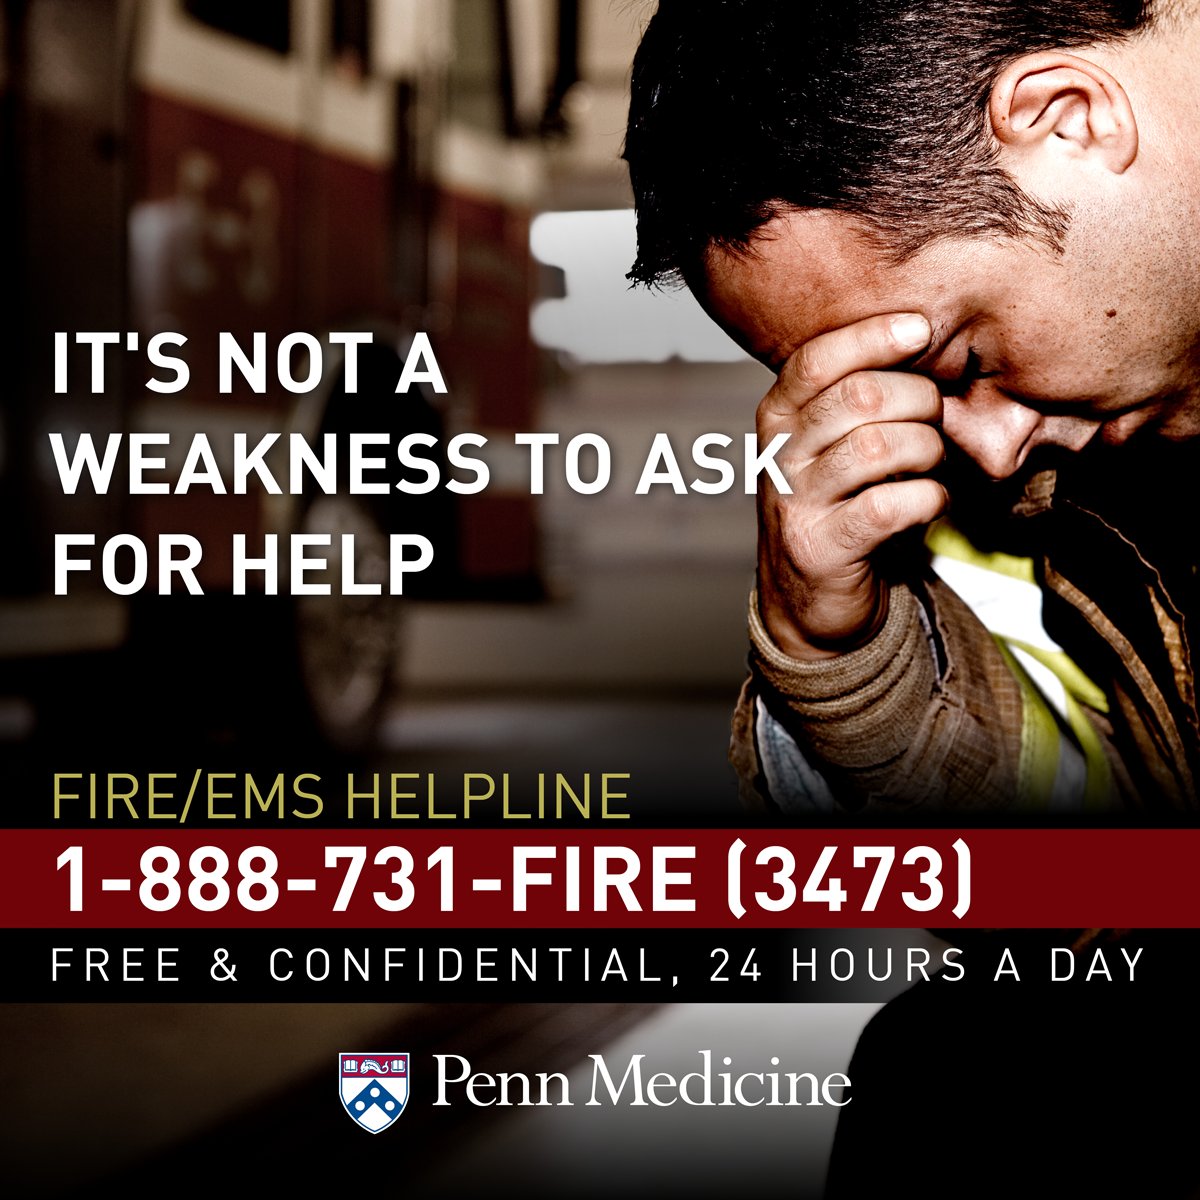 Caring for your mental health is vital for emergency healthcare workers and first responders — and reaching out for help is often the first step. If you're struggling, call the helpline below. #MentalHealthAwarenessMonth